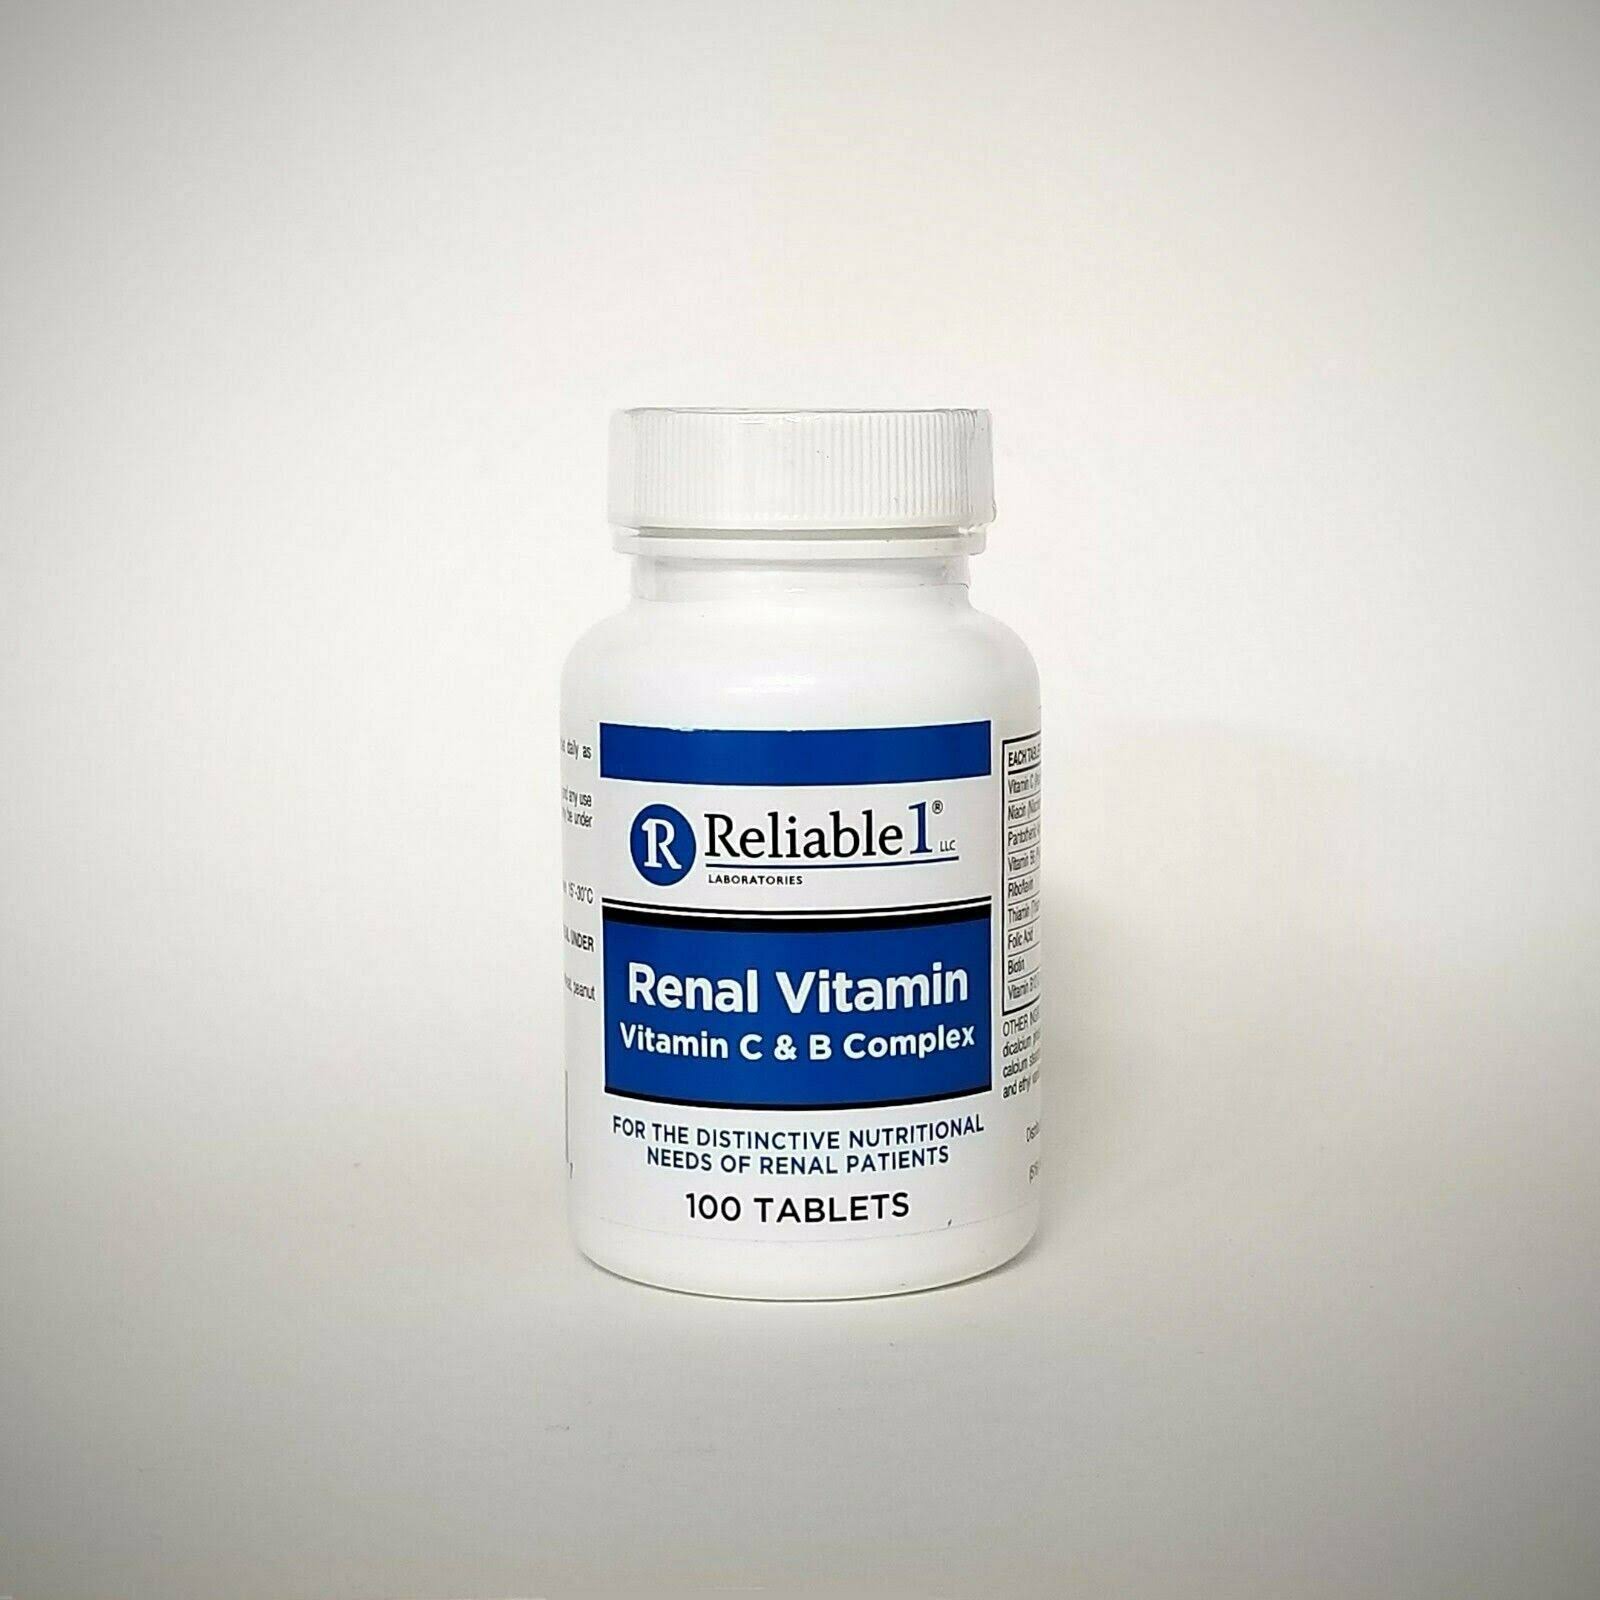 Reliable 1 Renal Vitamin C and B Complex Supplement - 100 Tablets